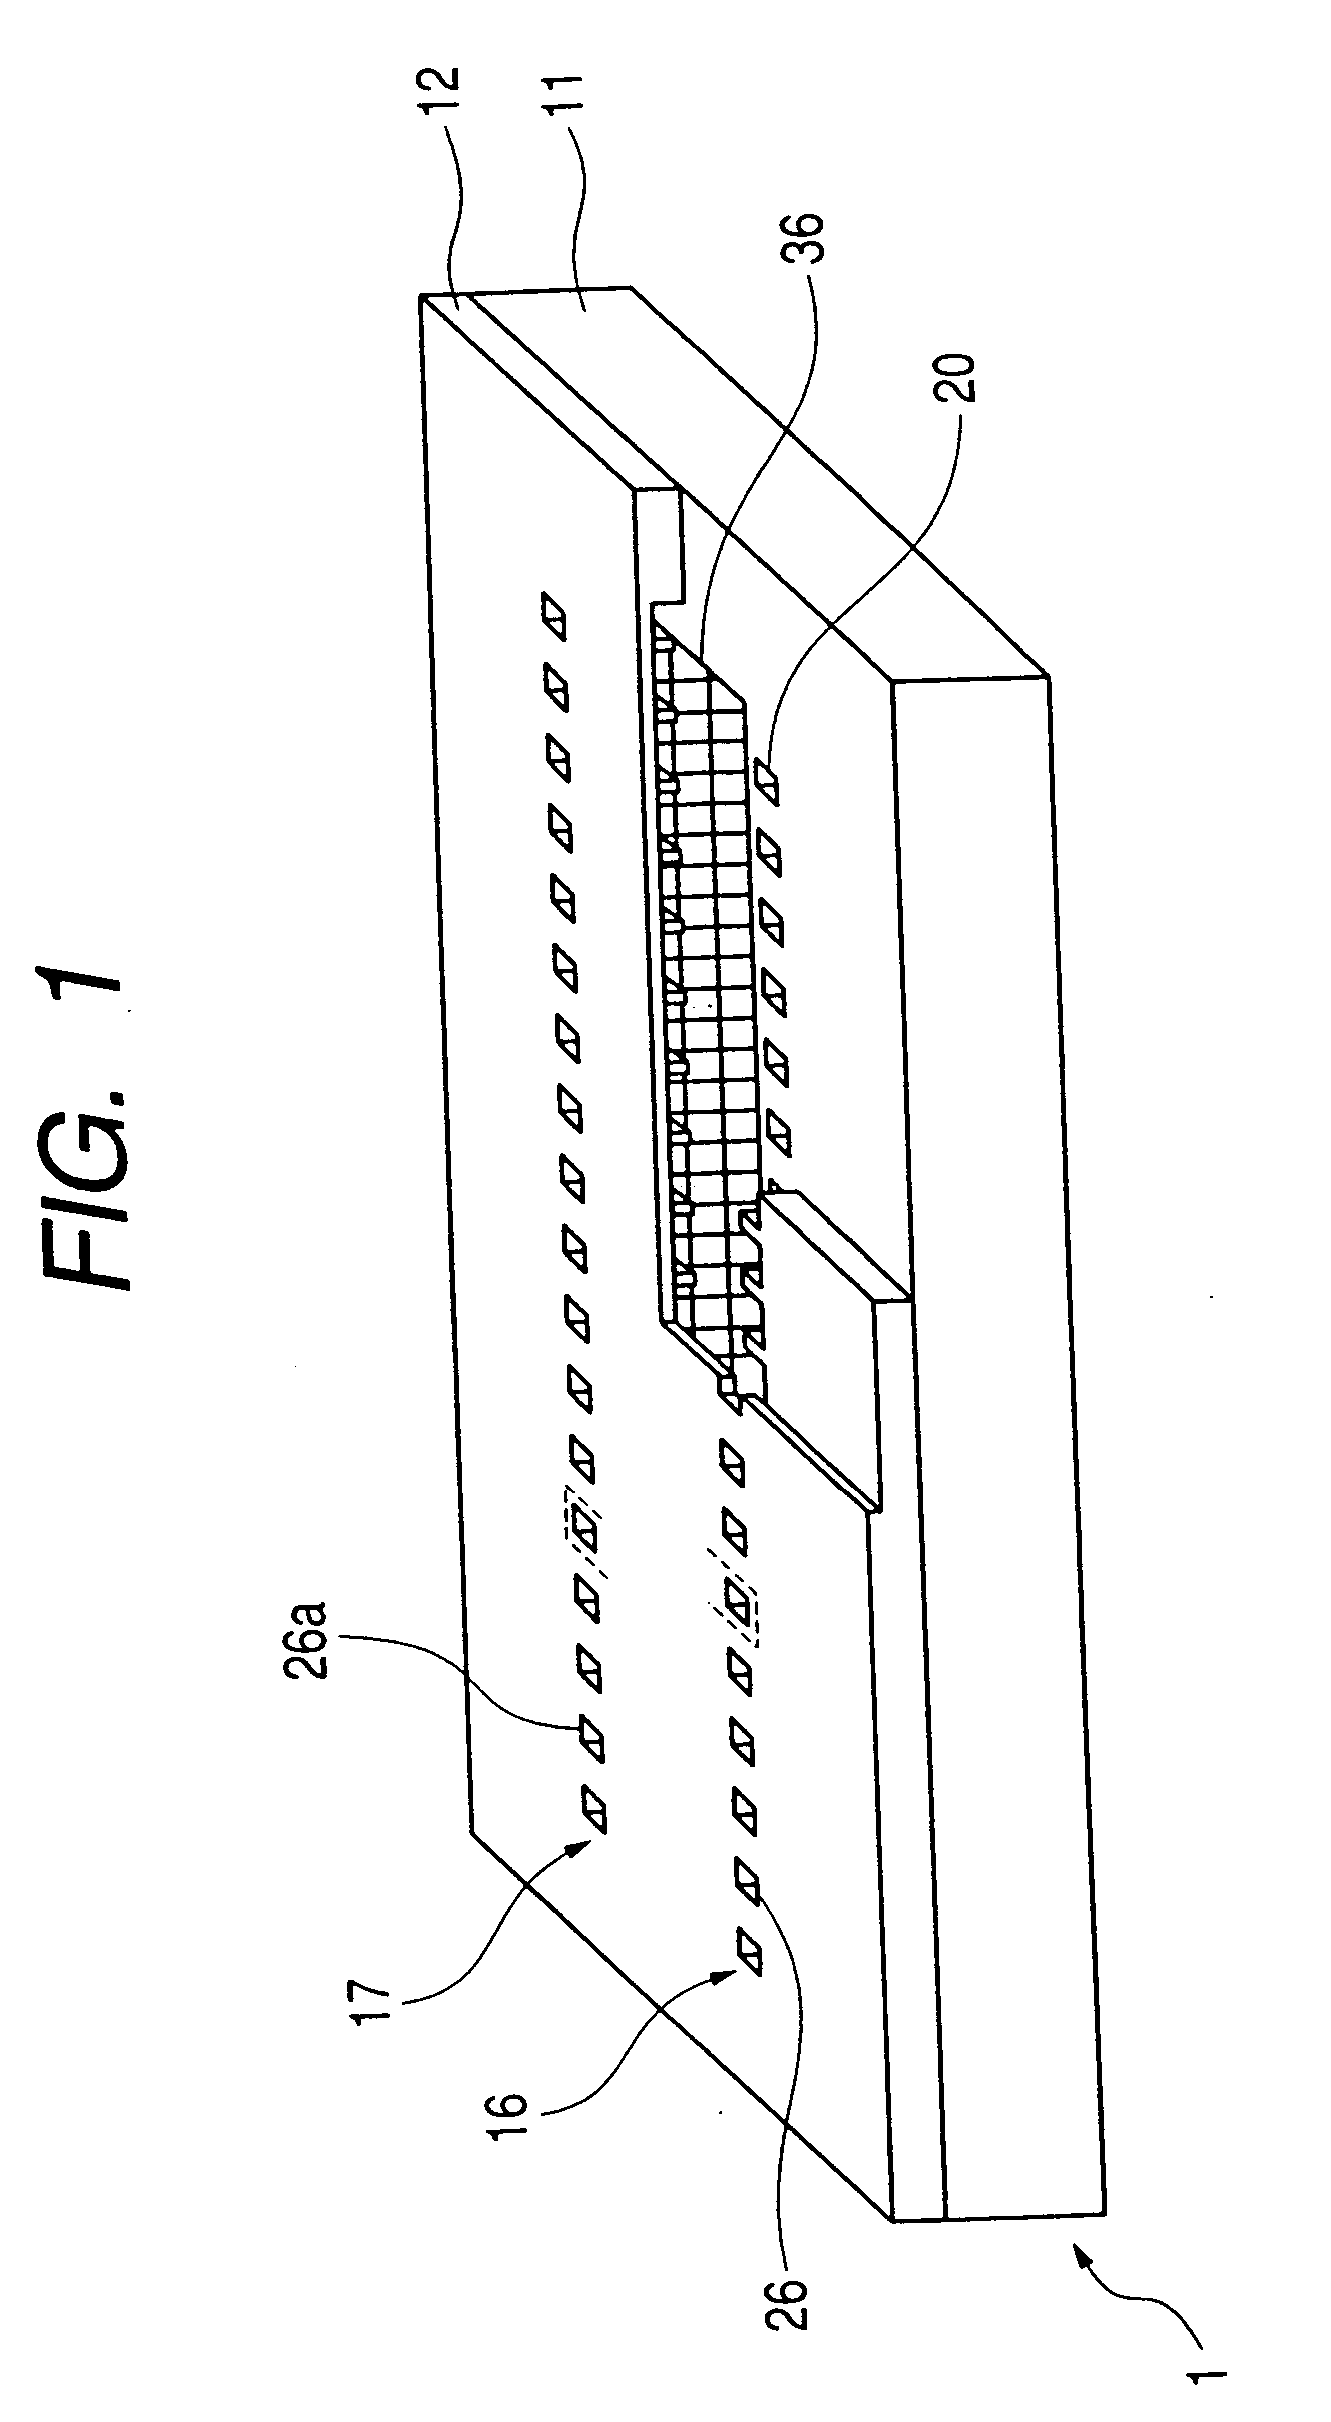 Liquid discharge head and method for manufacturing such head